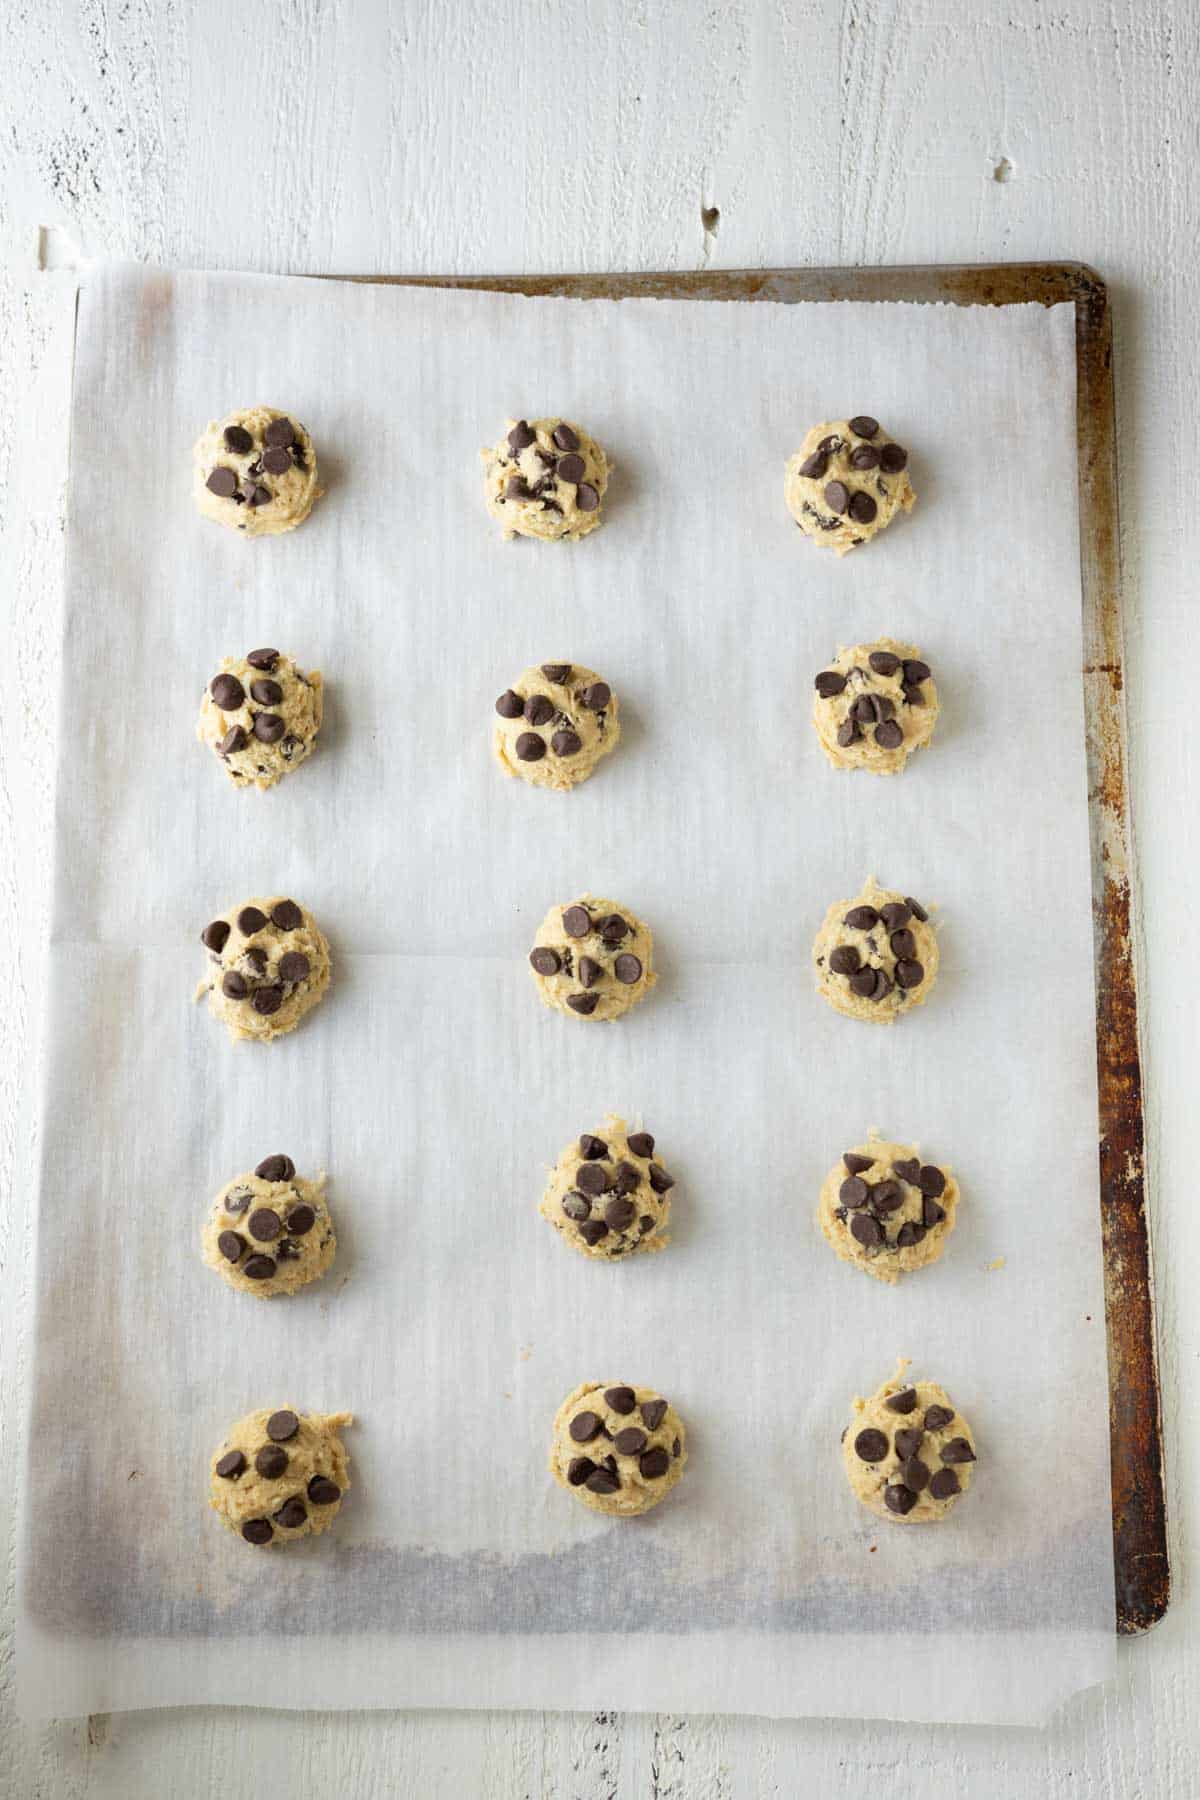 Coconut chocolate chip cookie dough balls on a baking sheet.